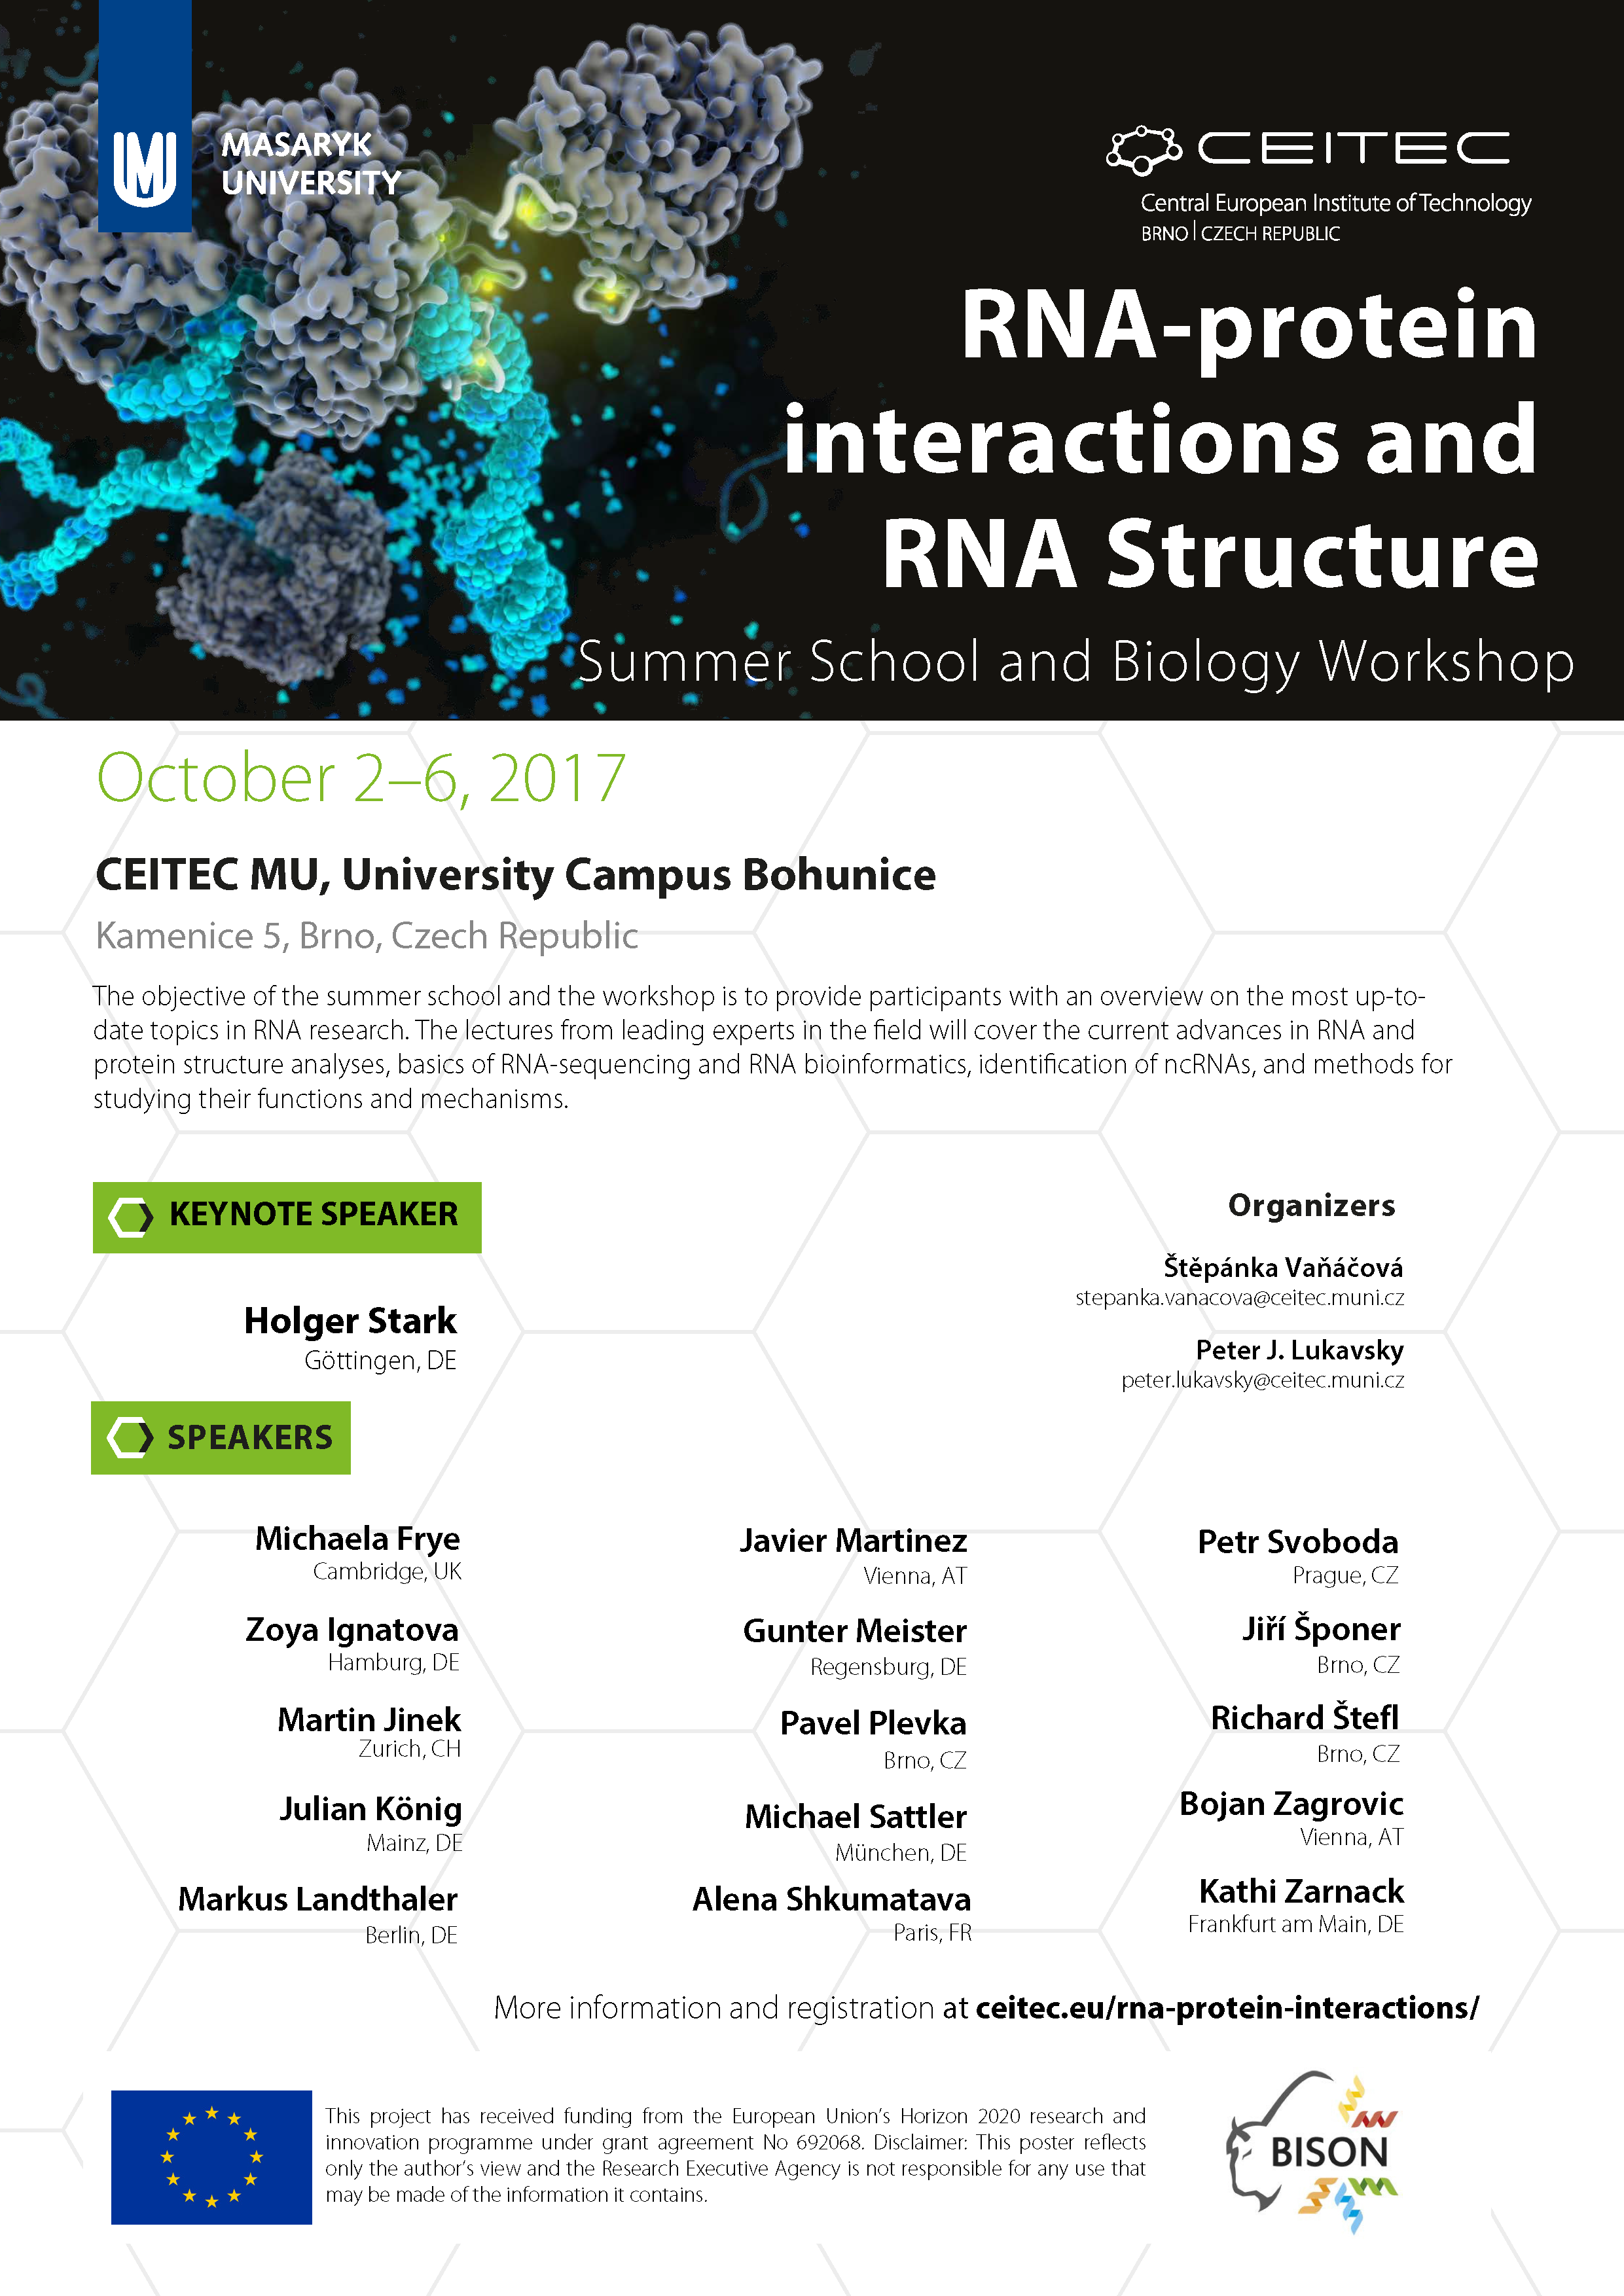 The objective of the summer school is to provide participants with an overview on the most up-to-date topics in RNA research. The lectures from leading experts in the field will cover both, the molecular mechanisms of protein-RNA interactions and role of ncRNAs and RNA-binding proteins in cellular and organismal physiology. The lectures will cover the current advances in RNA and protein structure analyses, basics of RNA-sequencing and RNA bioinformatics, identification of  ncRNAs, and methods for studying their functions and mechanisms.